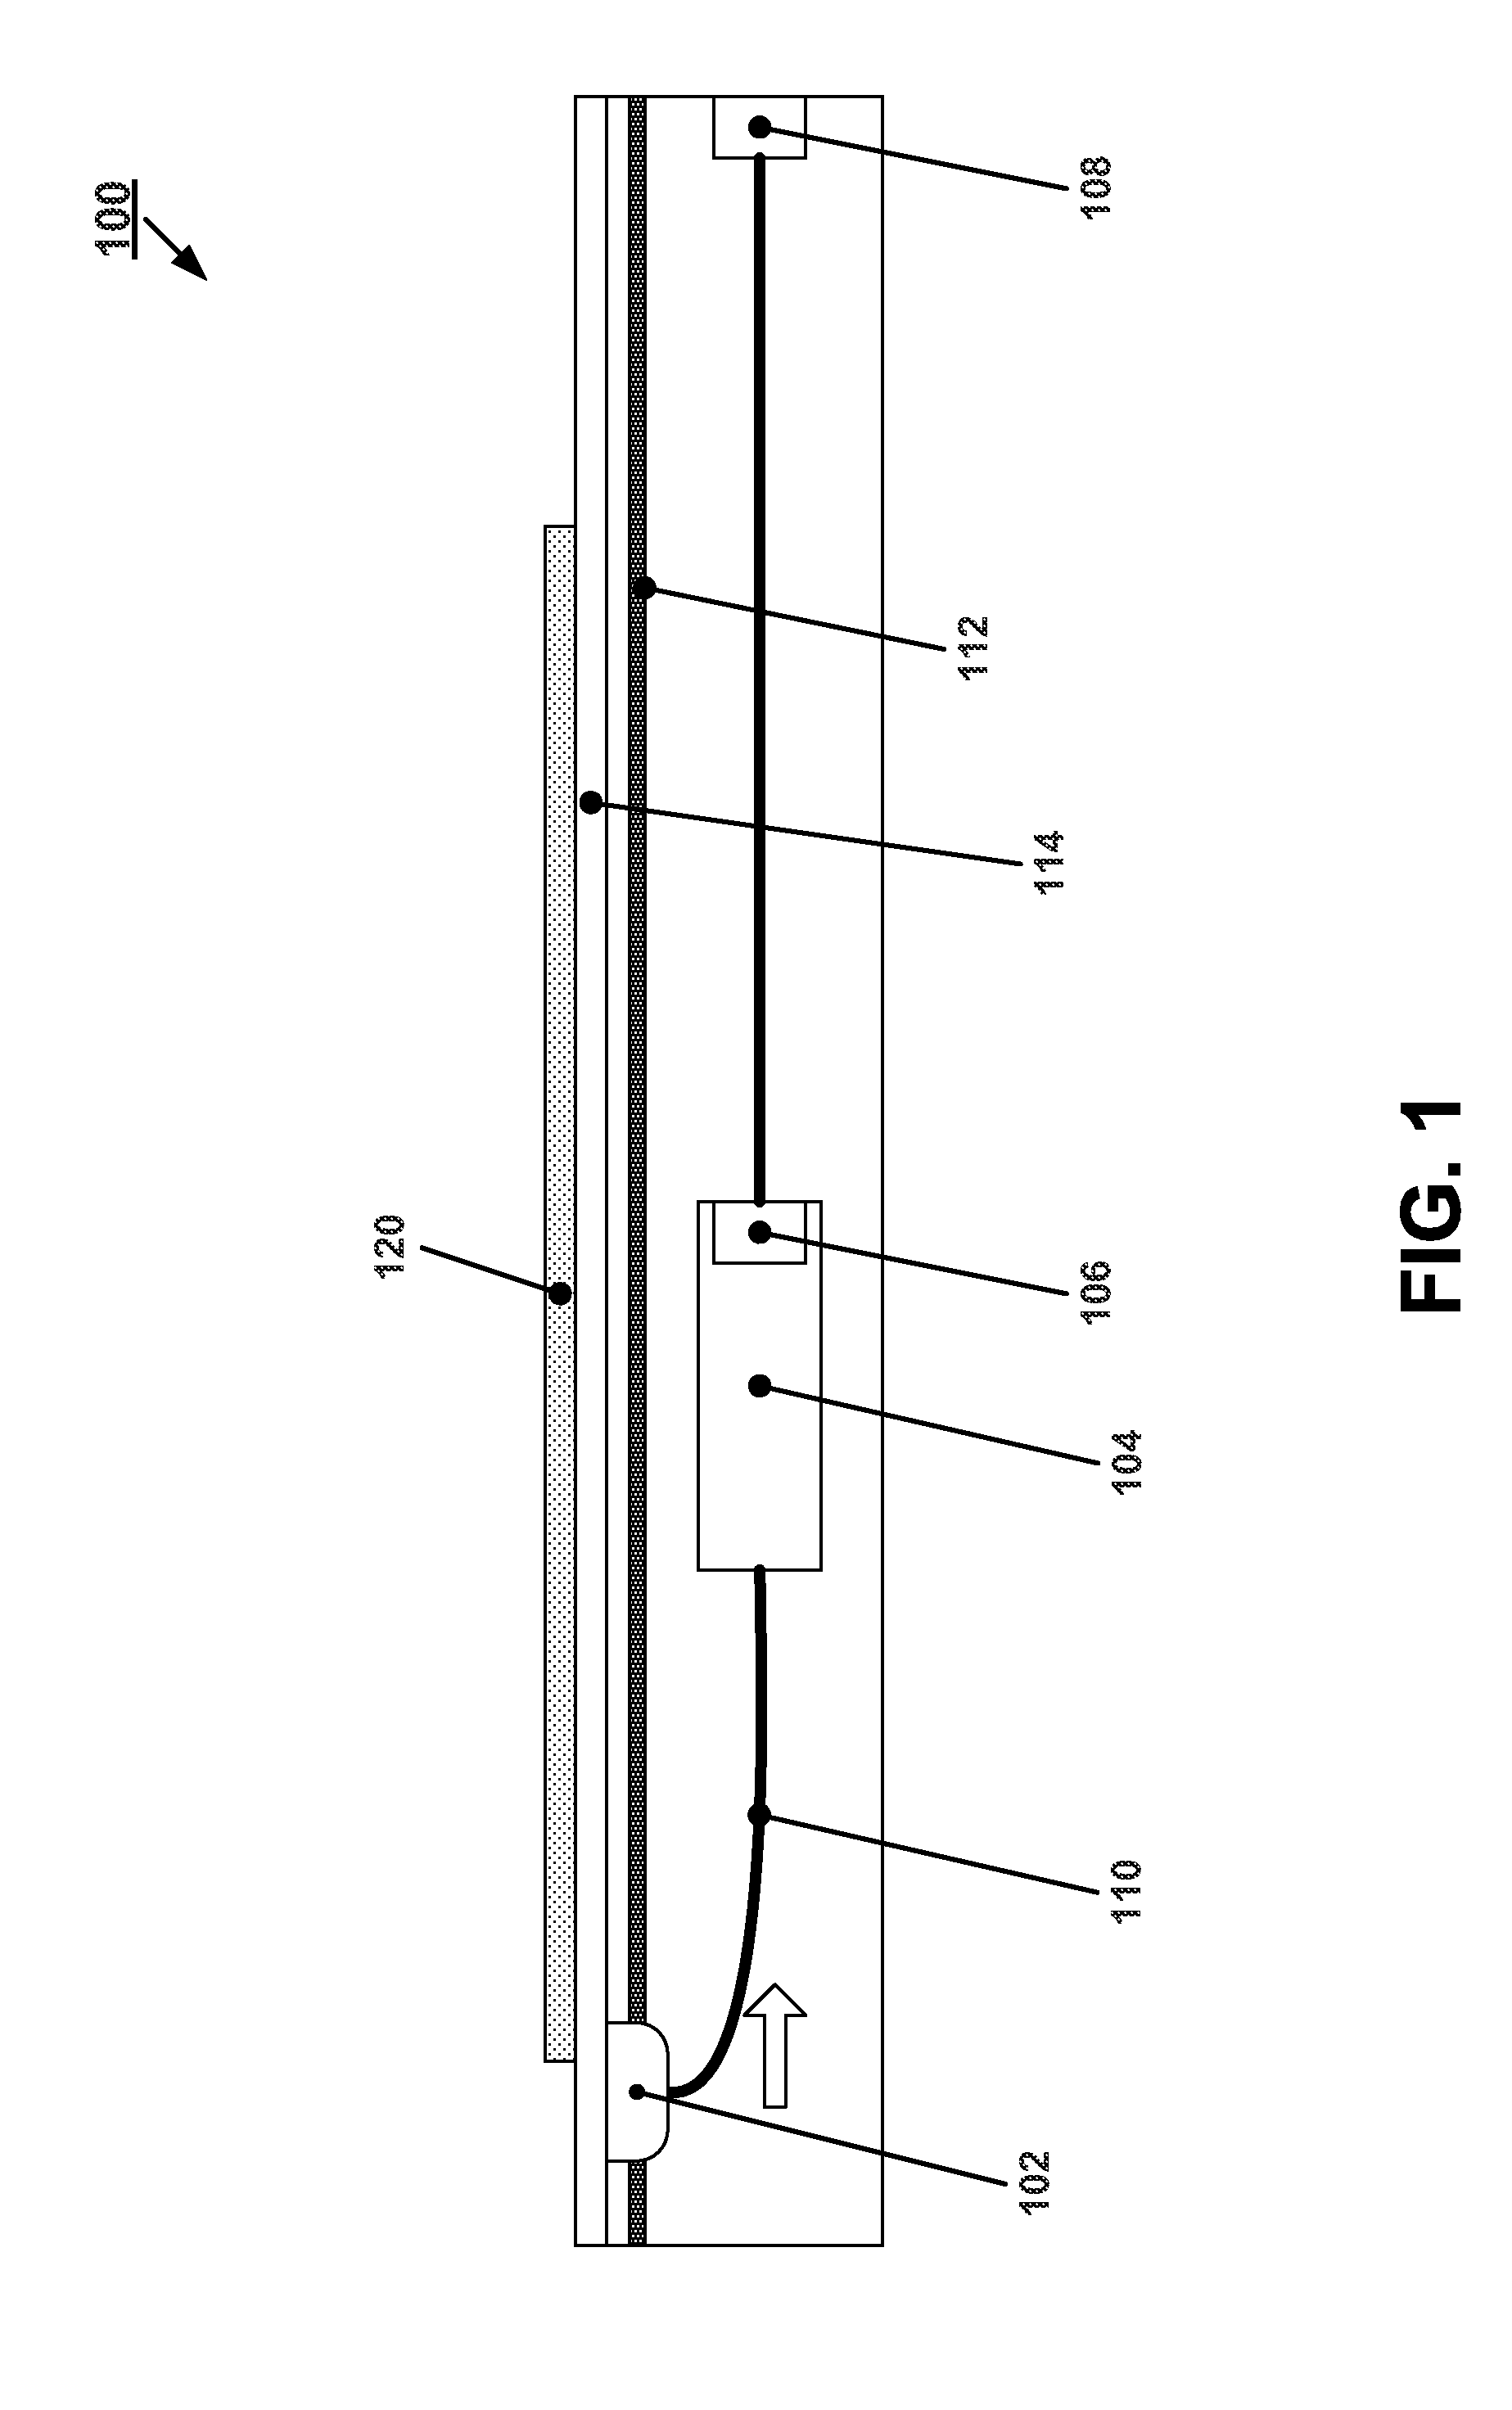 Systems and methods for color defringing